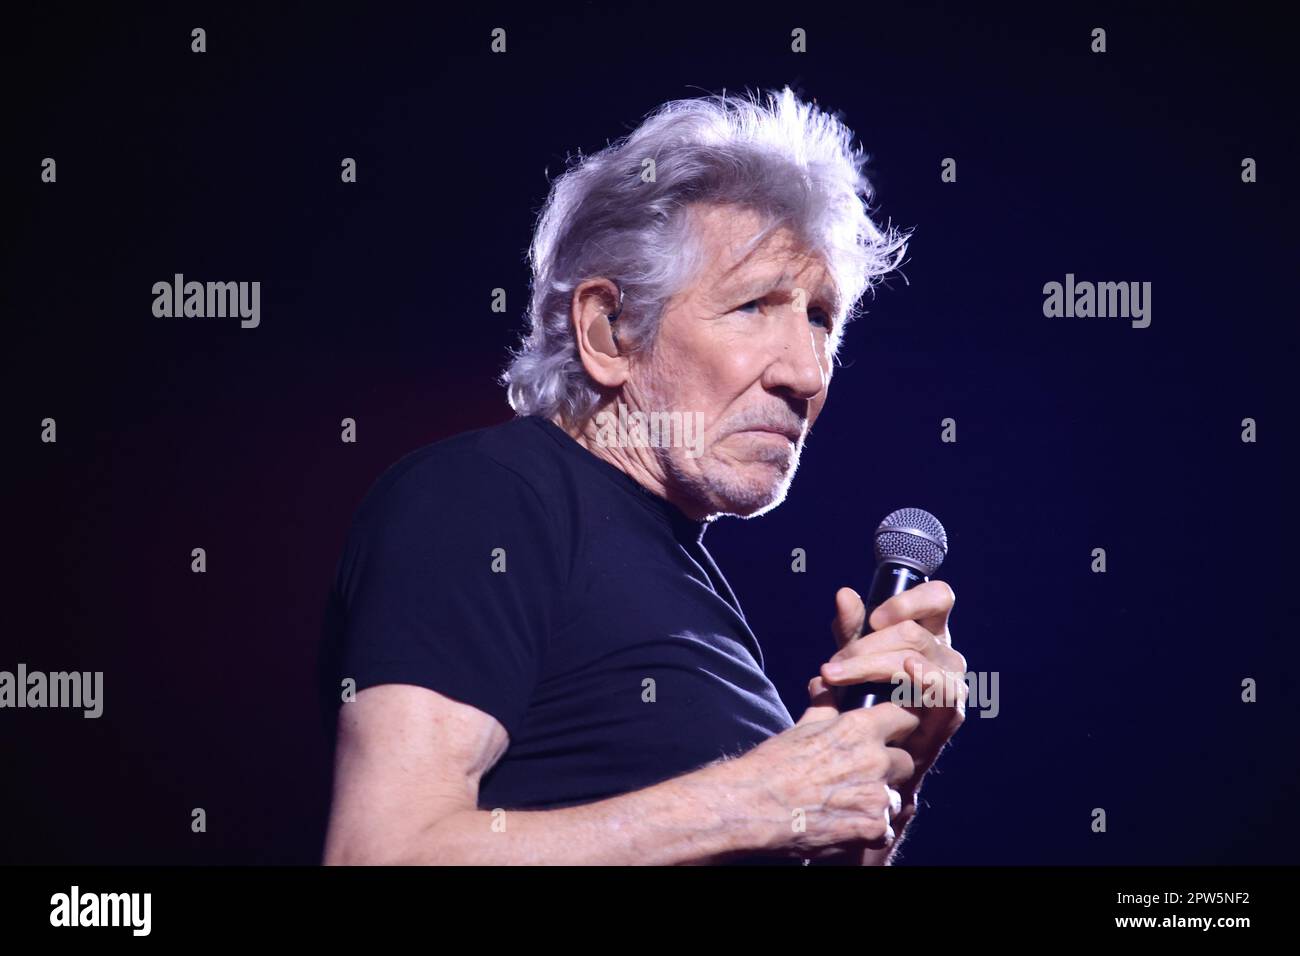 Bologna, Italy. 28th Apr, 2023. Roger Waters, bassist, songwriter and former member of the rock band Pink Floyd performing on stage in Bologna, April 28, 2023, Italy, during his european tour. Photo Michele Nucci Credit: Independent Photo Agency/Alamy Live News Stock Photo